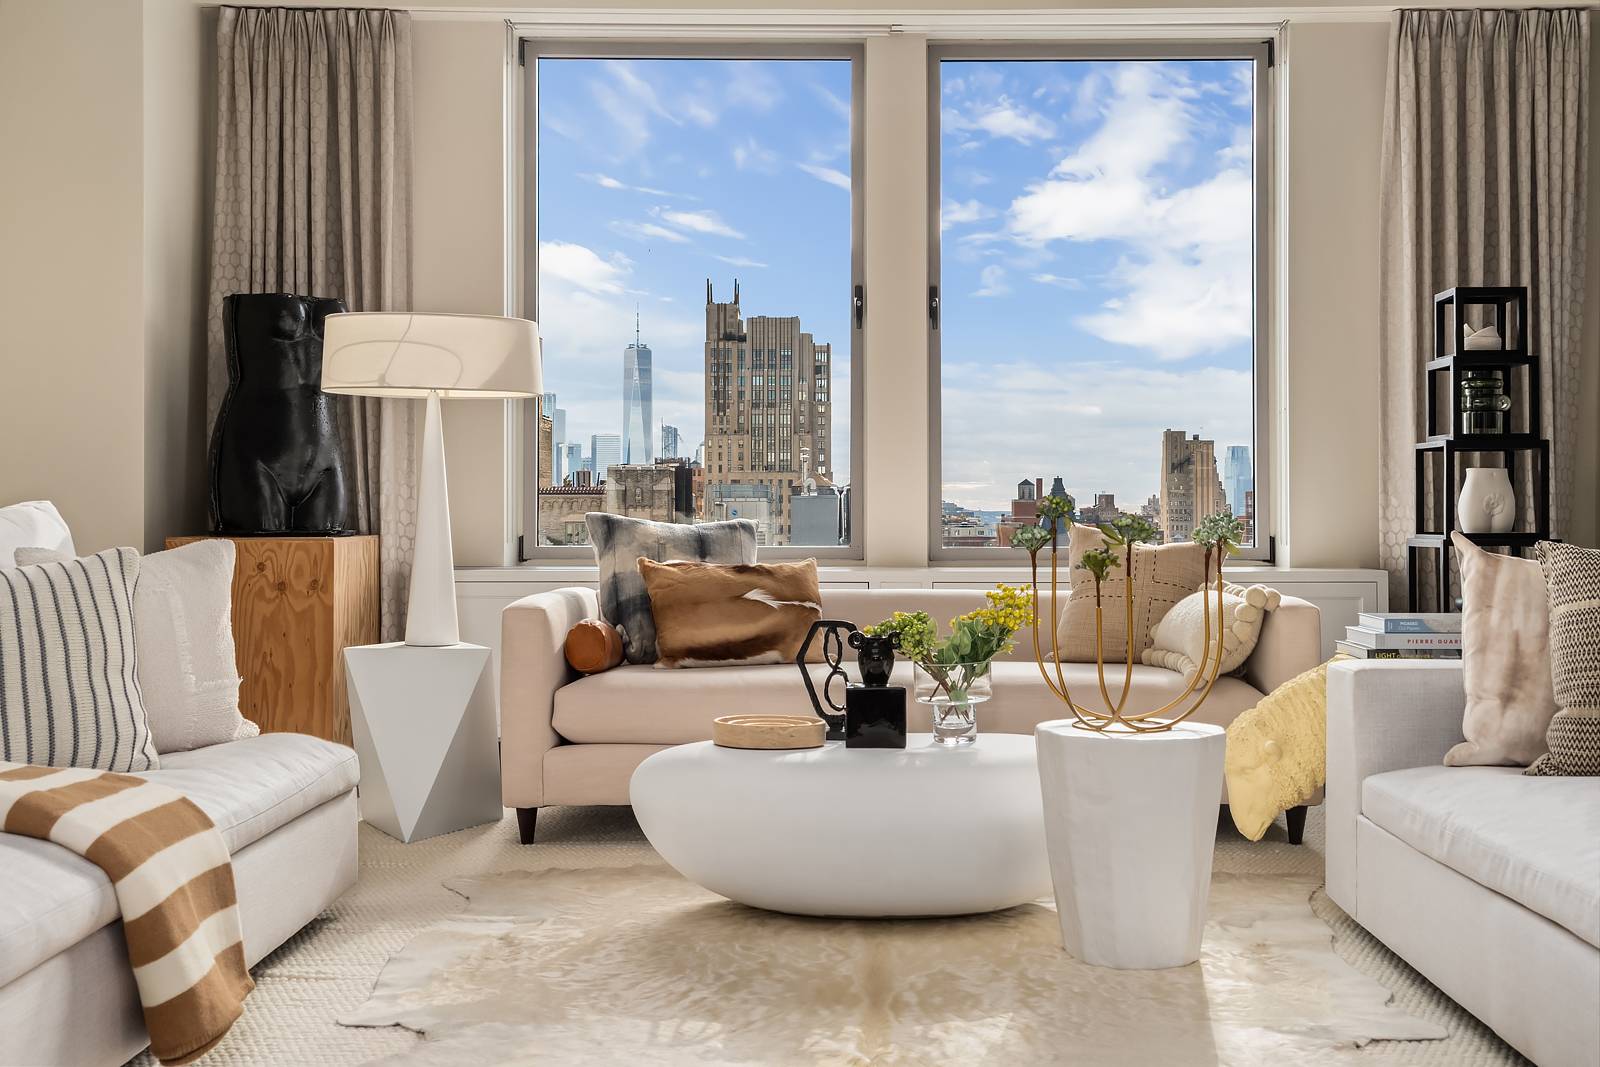 Penthouse W is an exceptional 3 bedroom, 3.